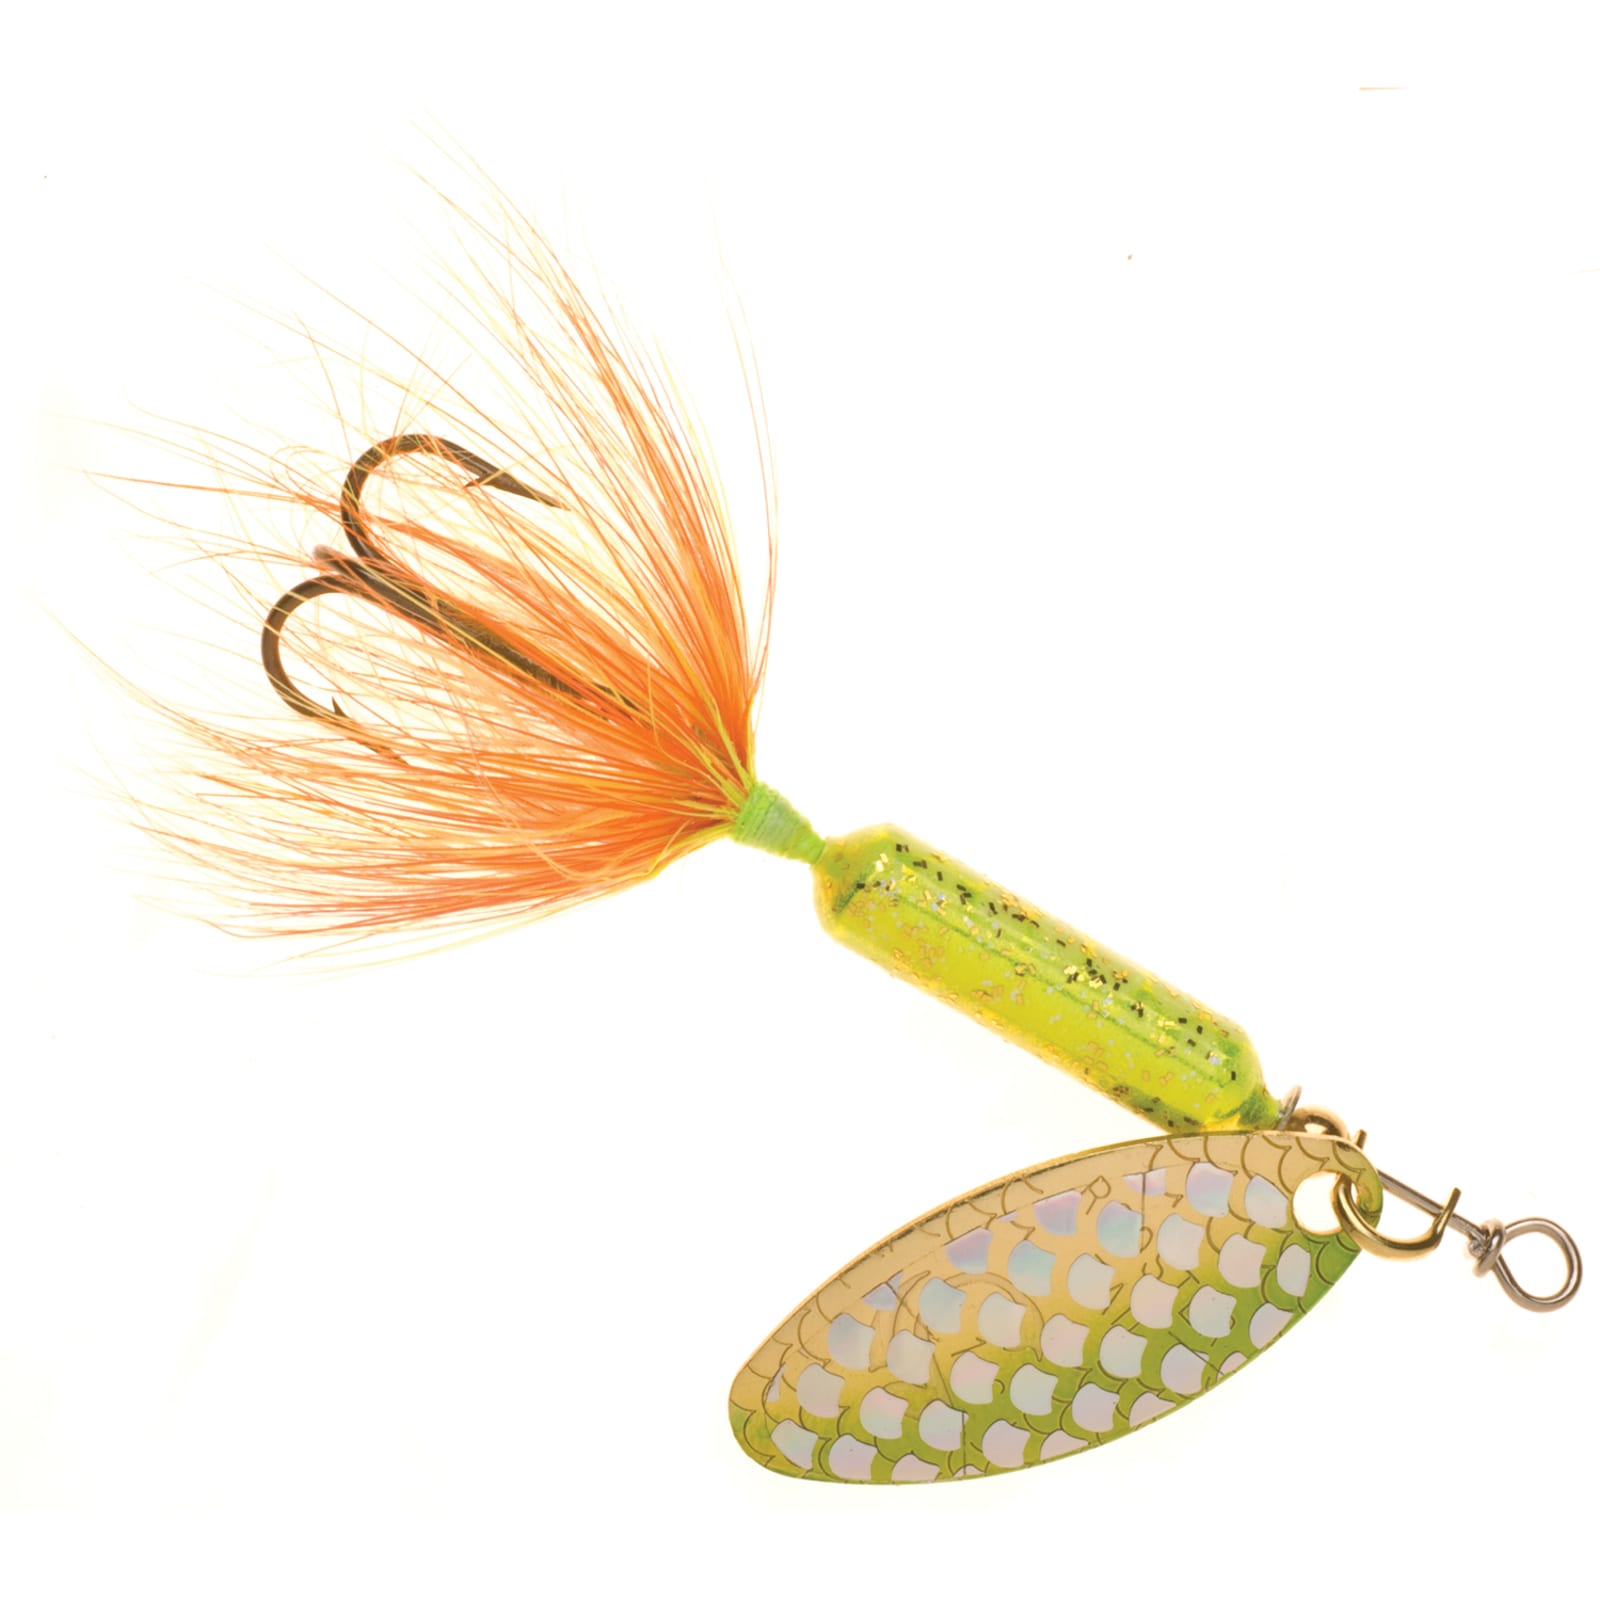 Yakima Rooster Tail 1/6oz Chartreuse